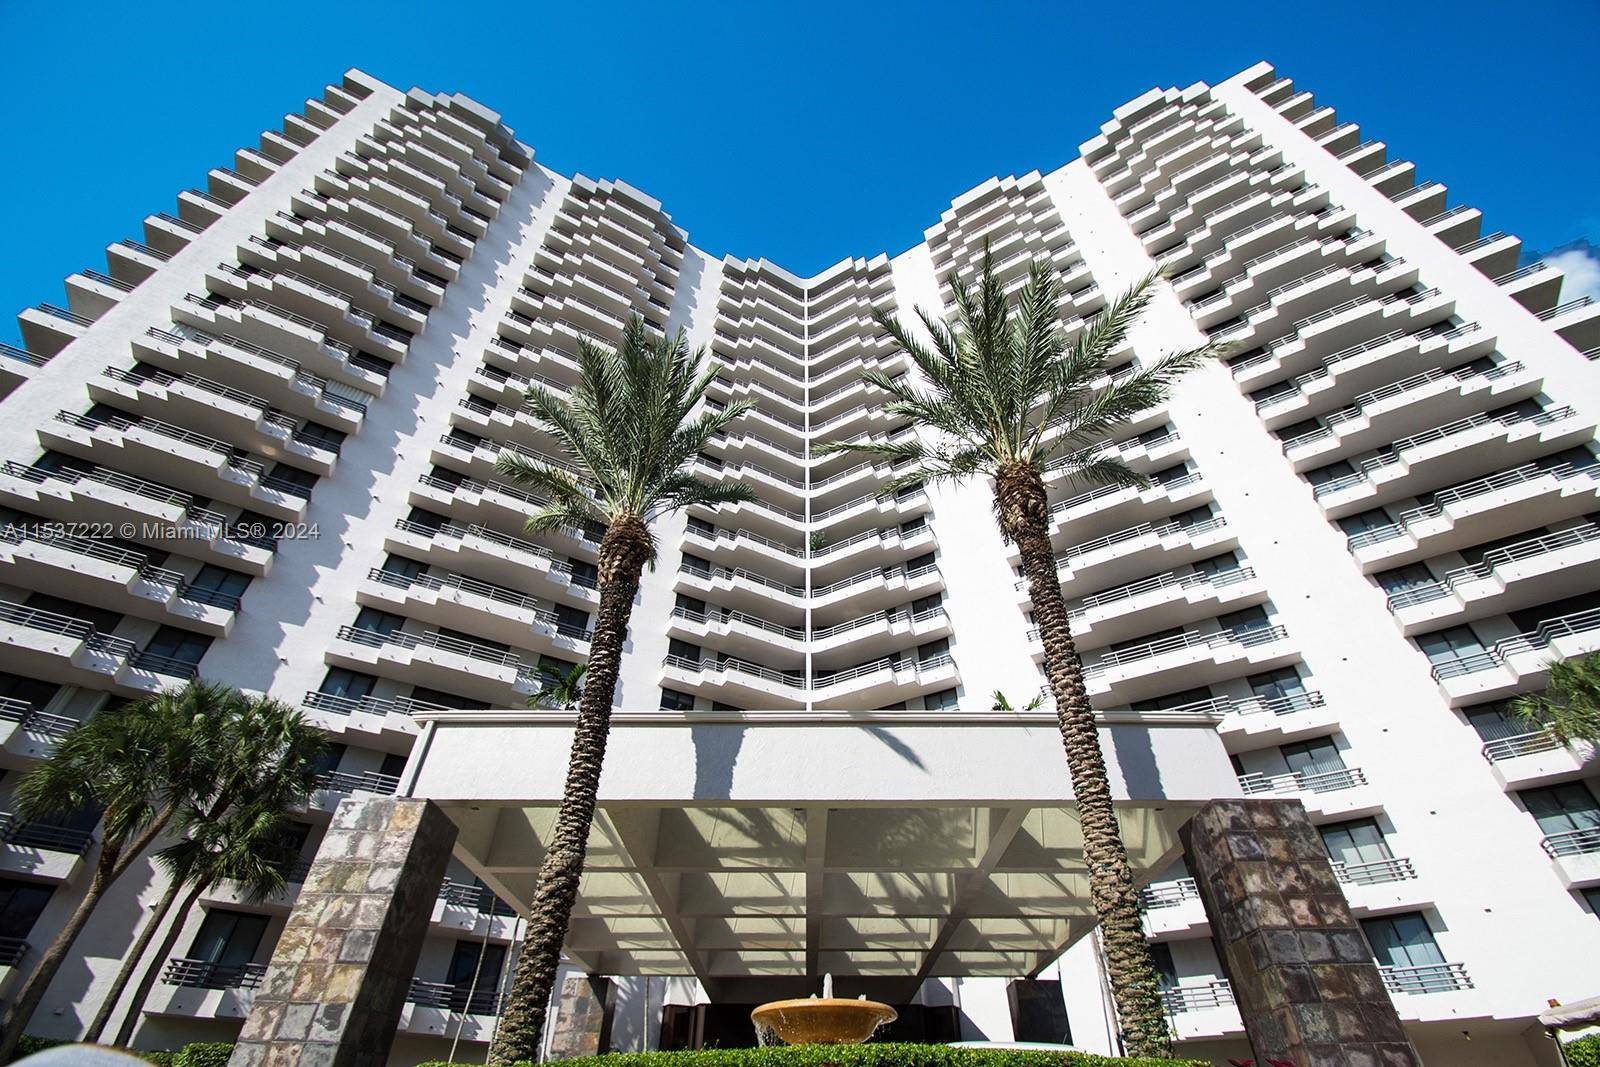 Parc Central East in Aventura, Florida, stands out for its elegance and prime location, offering views of the Turnberry Isle Country Club and Aventura Mall.